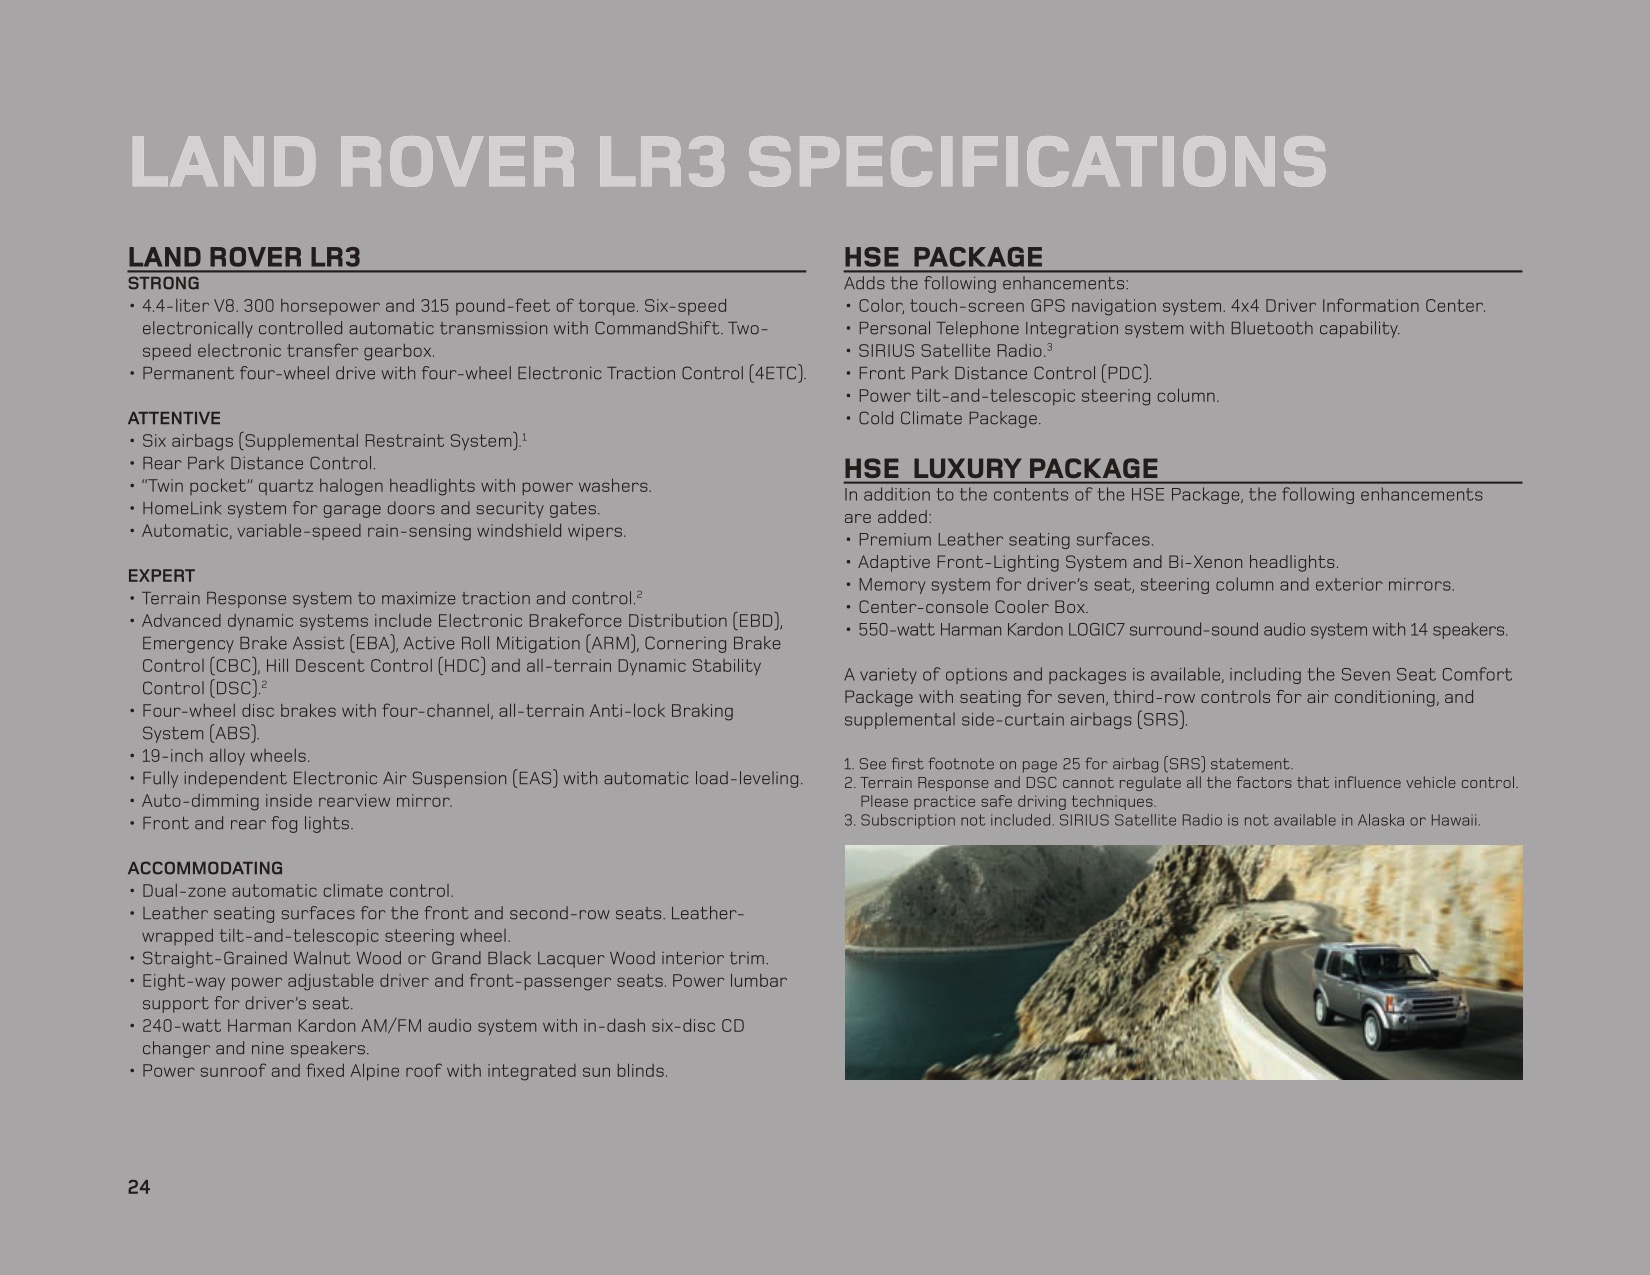 2009 Land Rover Brochure Page 7